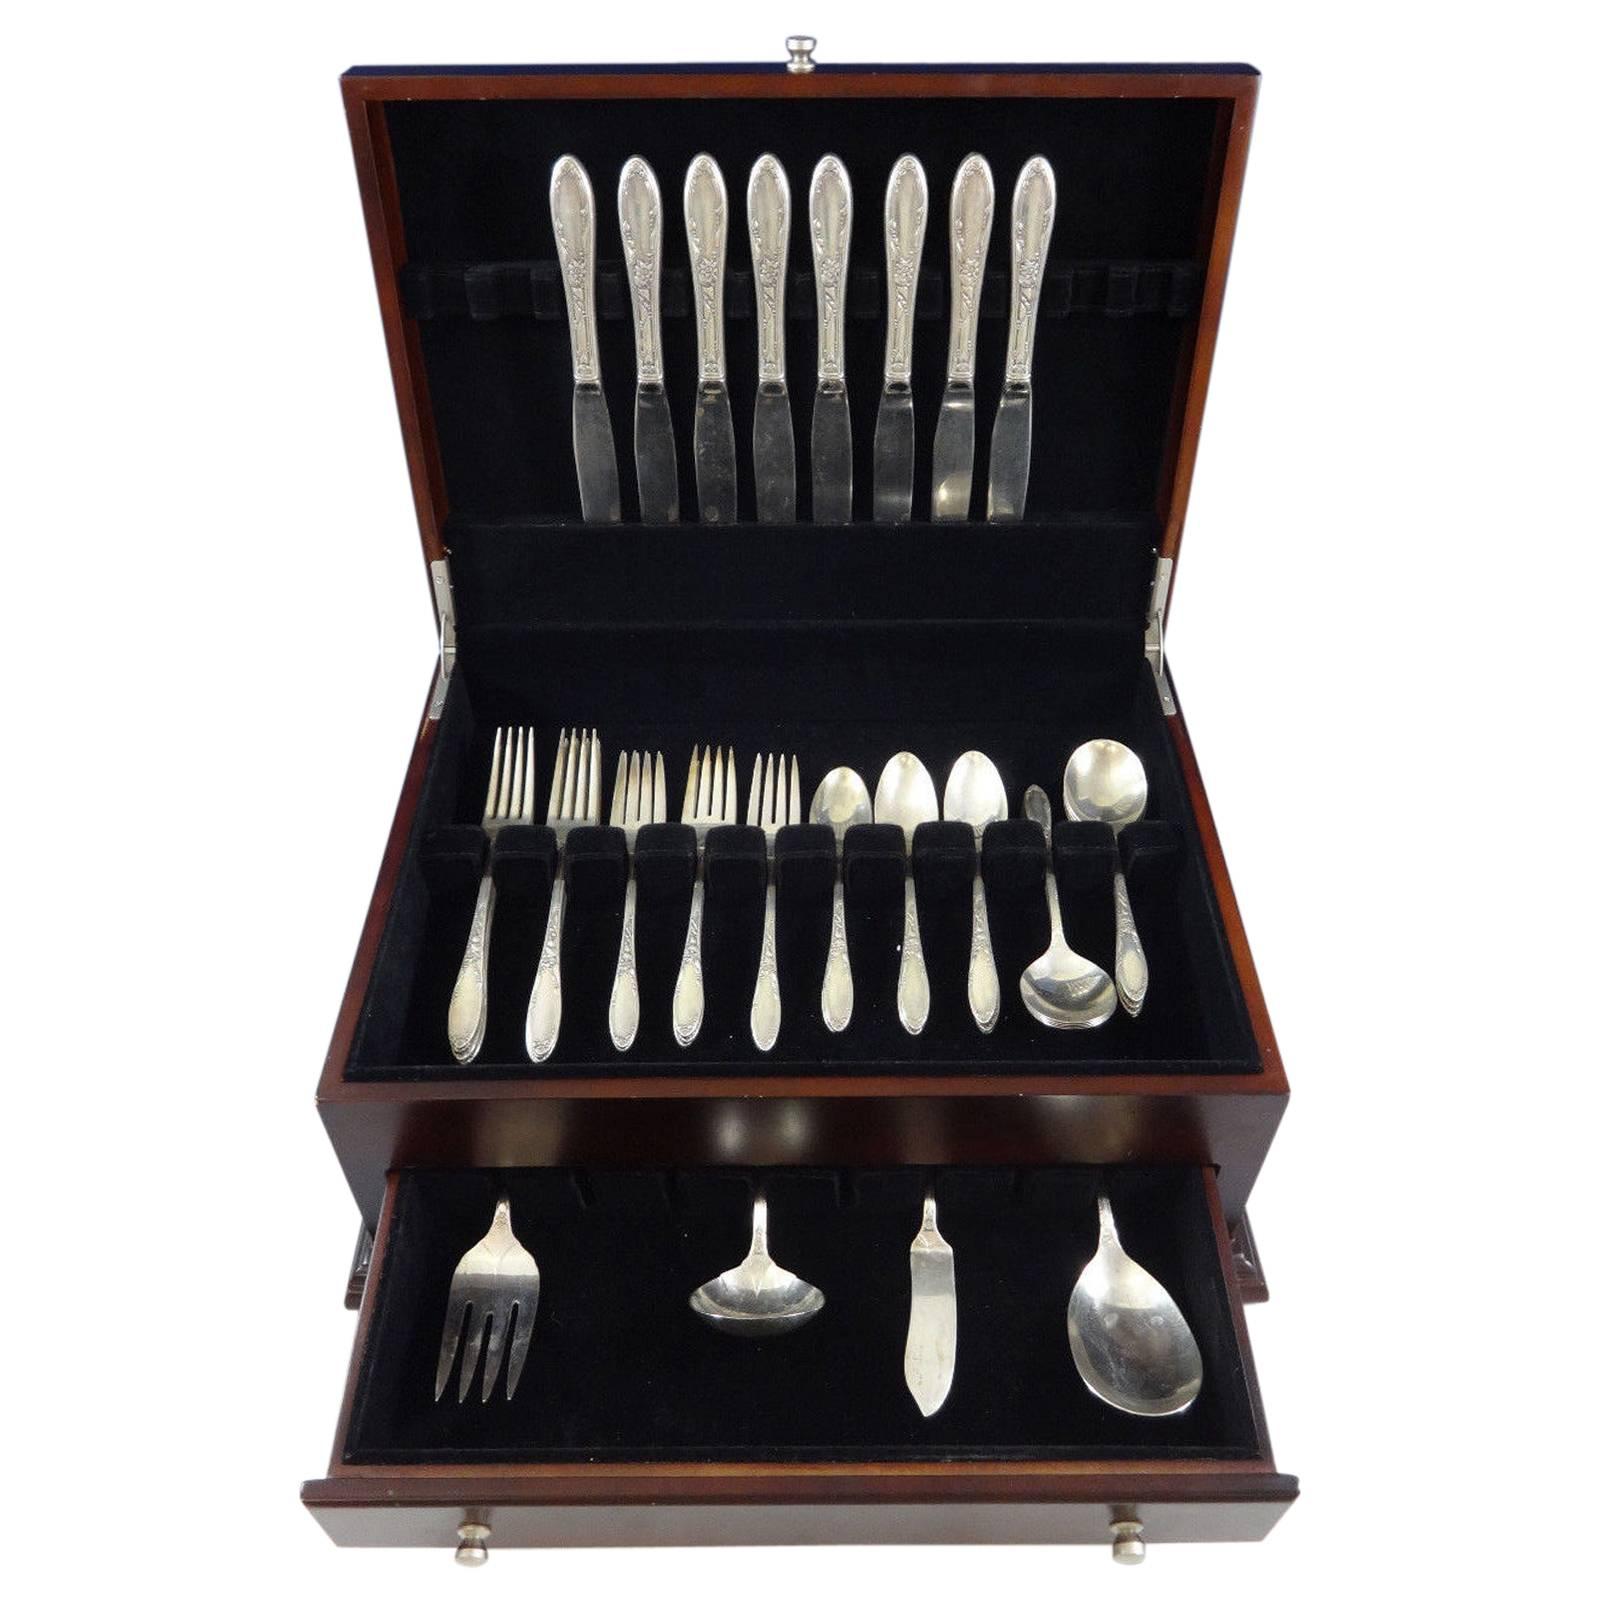 Beautiful Virginian by Oneida sterling silver flatware set of 44 pieces. This set includes:

Eight knives, 9